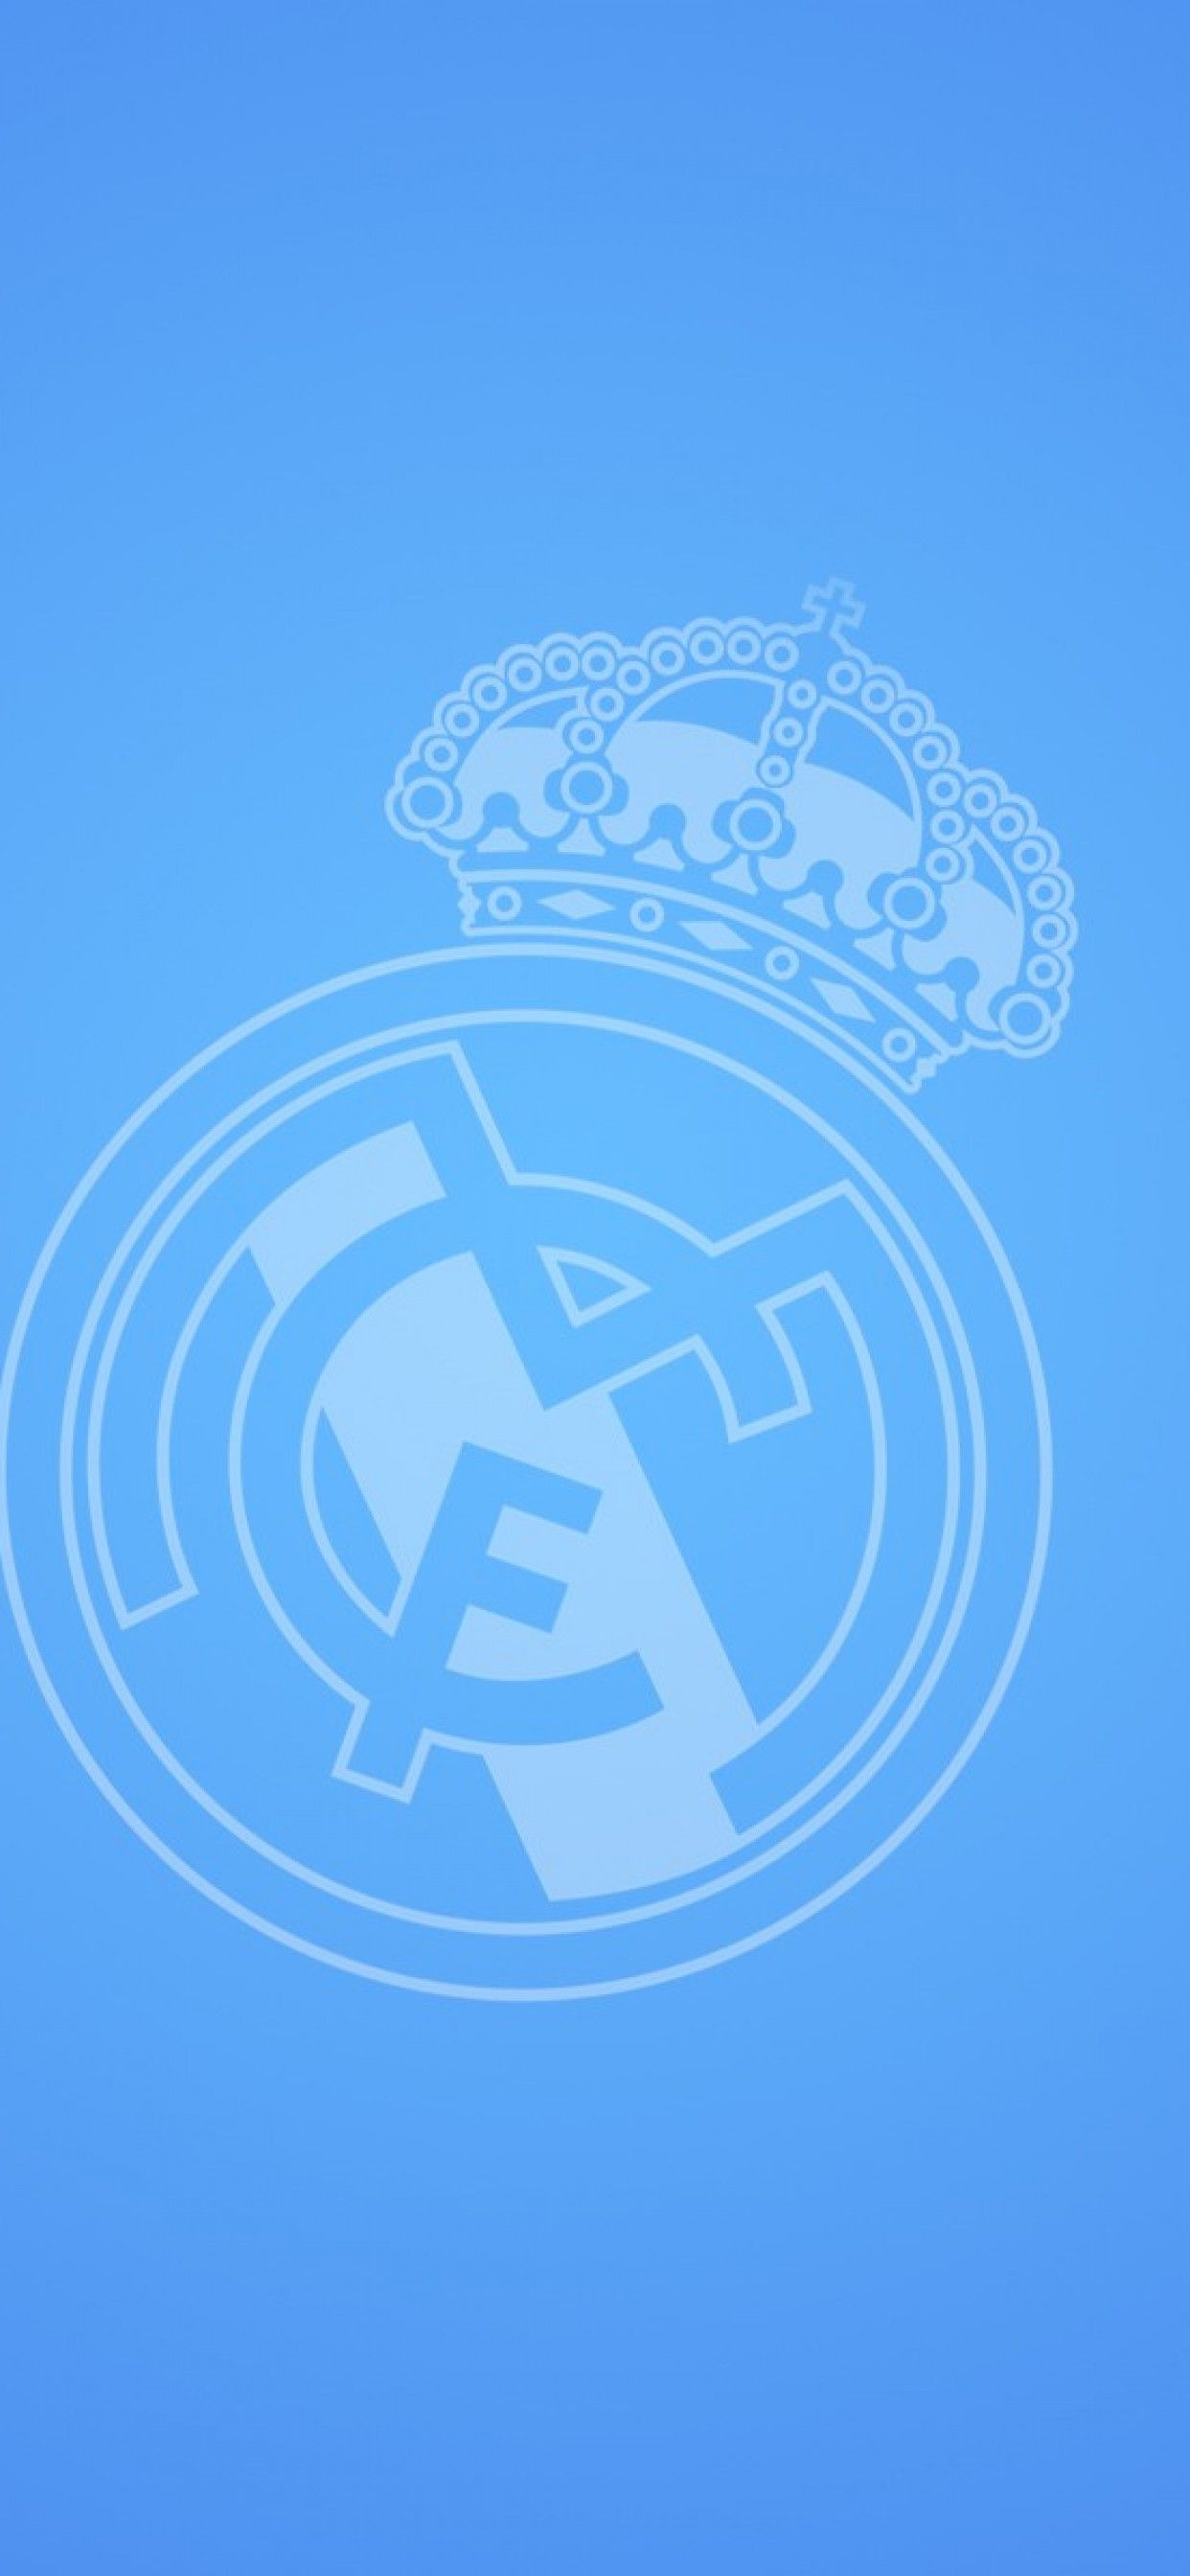 Real Madrid Wallpapers Iphone